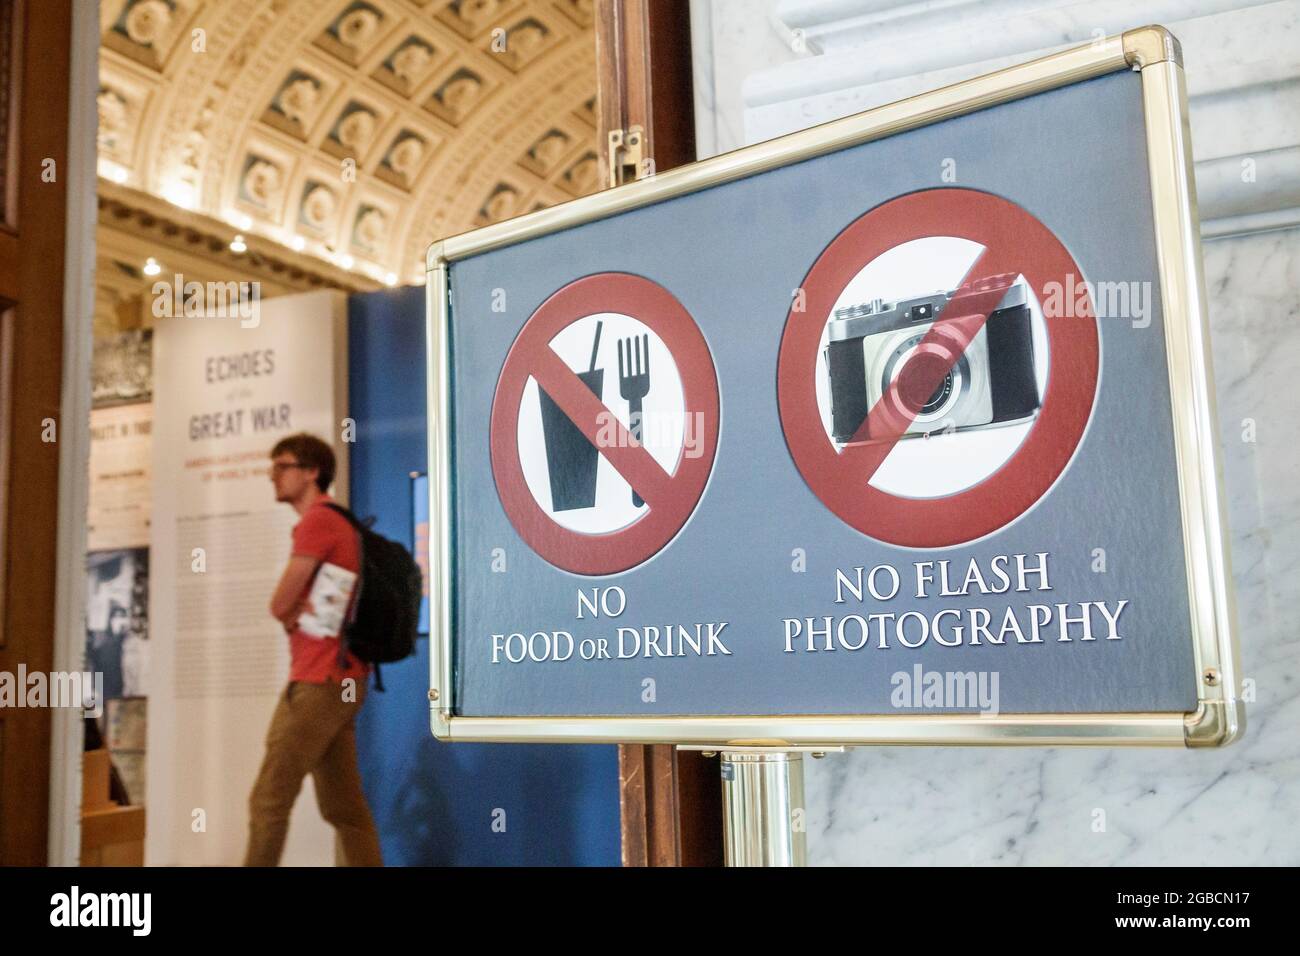 Washington DC,Library of Congress Thomas Jefferson Memorial Building,sign rules no food drink flash photography interior inside, Stock Photo